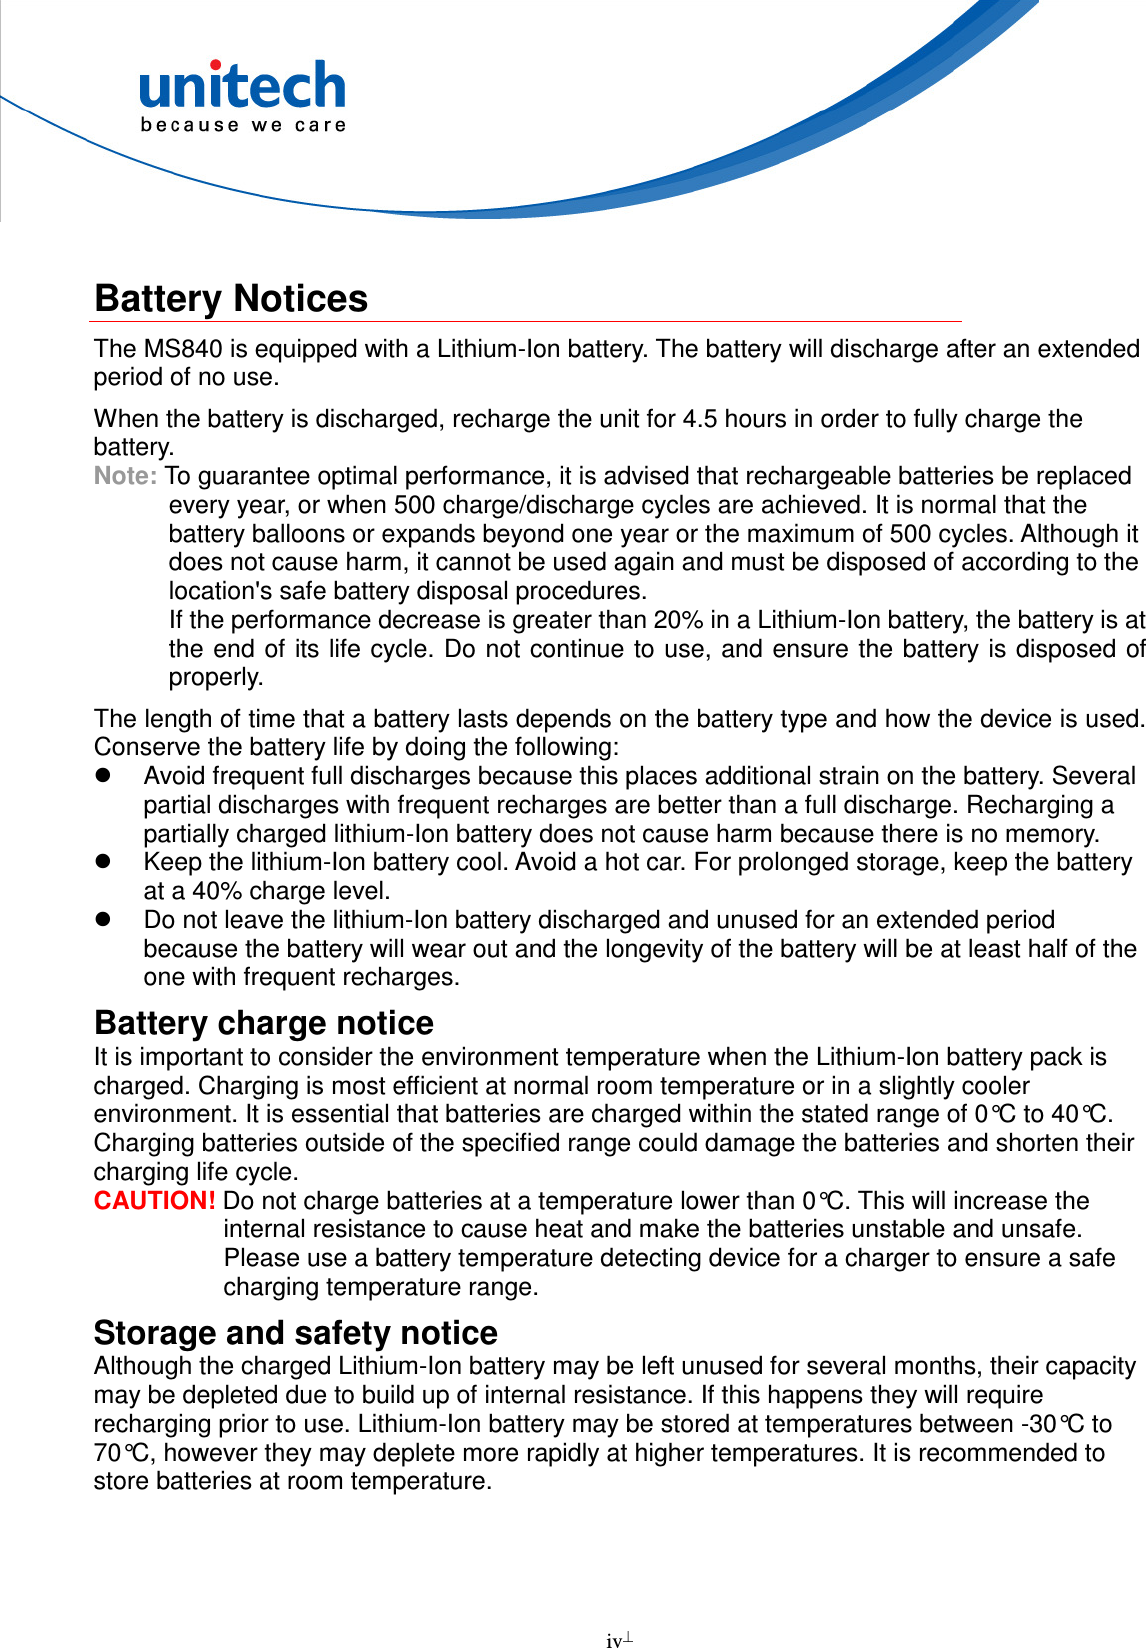  iv   Battery Notices The MS840 is equipped with a Lithium-Ion battery. The battery will discharge after an extended period of no use. When the battery is discharged, recharge the unit for 4.5 hours in order to fully charge the battery.   Note: To guarantee optimal performance, it is advised that rechargeable batteries be replaced every year, or when 500 charge/discharge cycles are achieved. It is normal that the battery balloons or expands beyond one year or the maximum of 500 cycles. Although it does not cause harm, it cannot be used again and must be disposed of according to the location&apos;s safe battery disposal procedures. If the performance decrease is greater than 20% in a Lithium-Ion battery, the battery is at the end of its life cycle. Do not continue to use, and ensure the battery is disposed of properly. The length of time that a battery lasts depends on the battery type and how the device is used. Conserve the battery life by doing the following:   Avoid frequent full discharges because this places additional strain on the battery. Several partial discharges with frequent recharges are better than a full discharge. Recharging a partially charged lithium-Ion battery does not cause harm because there is no memory.   Keep the lithium-Ion battery cool. Avoid a hot car. For prolonged storage, keep the battery at a 40% charge level.   Do not leave the lithium-Ion battery discharged and unused for an extended period because the battery will wear out and the longevity of the battery will be at least half of the one with frequent recharges. Battery charge notice It is important to consider the environment temperature when the Lithium-Ion battery pack is charged. Charging is most efficient at normal room temperature or in a slightly cooler environment. It is essential that batteries are charged within the stated range of 0°C to 40°C. Charging batteries outside of the specified range could damage the batteries and shorten their charging life cycle. CAUTION! Do not charge batteries at a temperature lower than 0°C. This will increase the internal resistance to cause heat and make the batteries unstable and unsafe. Please use a battery temperature detecting device for a charger to ensure a safe charging temperature range. Storage and safety notice Although the charged Lithium-Ion battery may be left unused for several months, their capacity may be depleted due to build up of internal resistance. If this happens they will require recharging prior to use. Lithium-Ion battery may be stored at temperatures between -30°C to 70°C, however they may deplete more rapidly at higher temperatures. It is recommended to store batteries at room temperature.